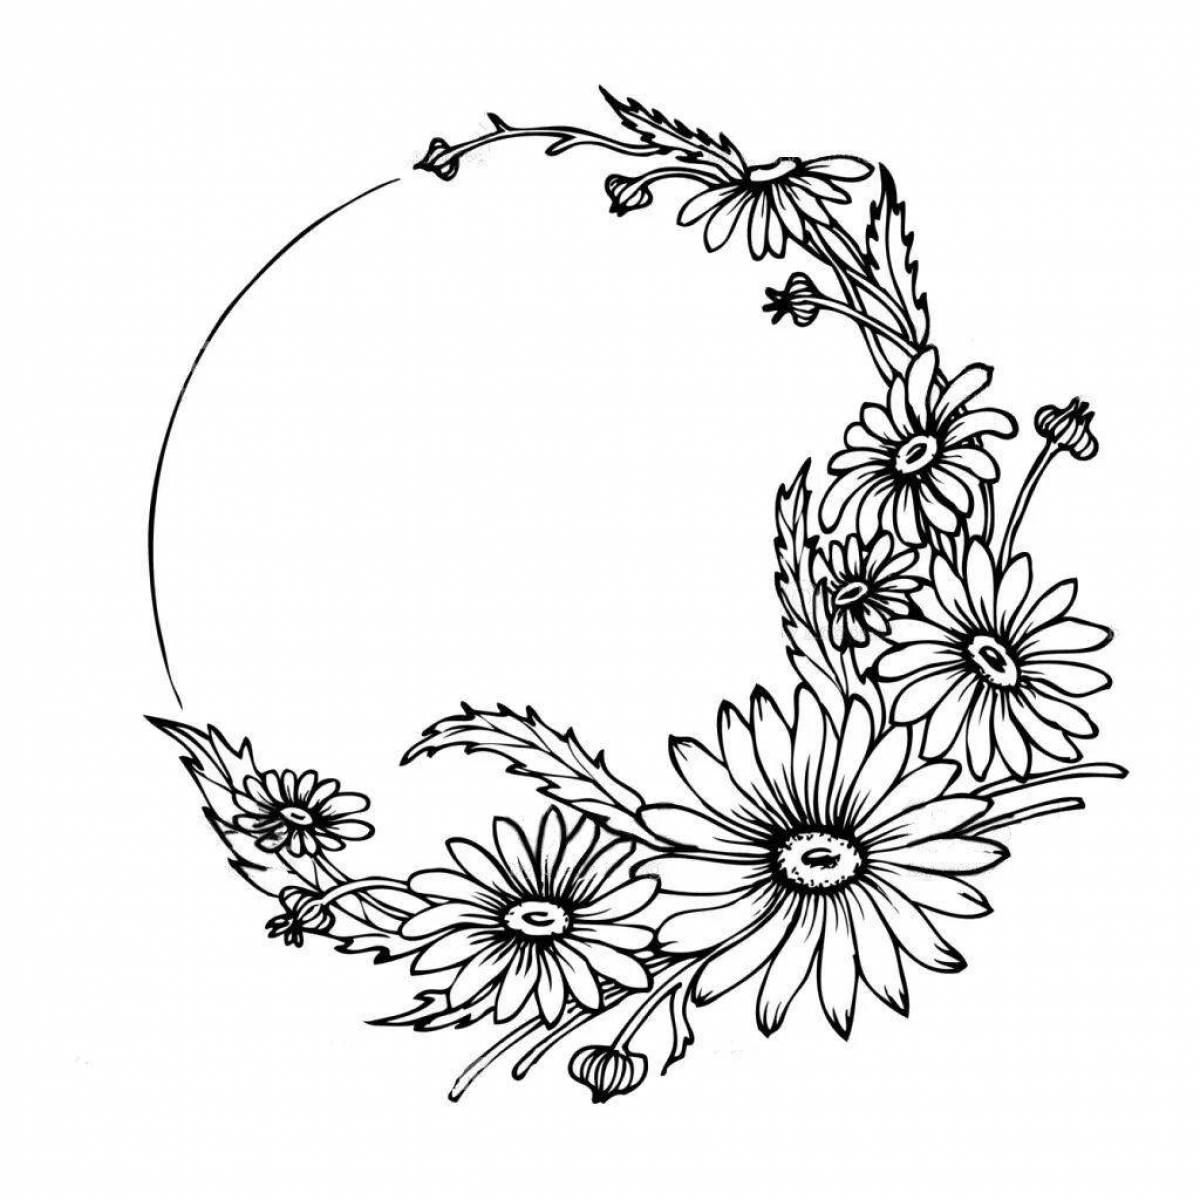 Coloring page living wreath of flowers